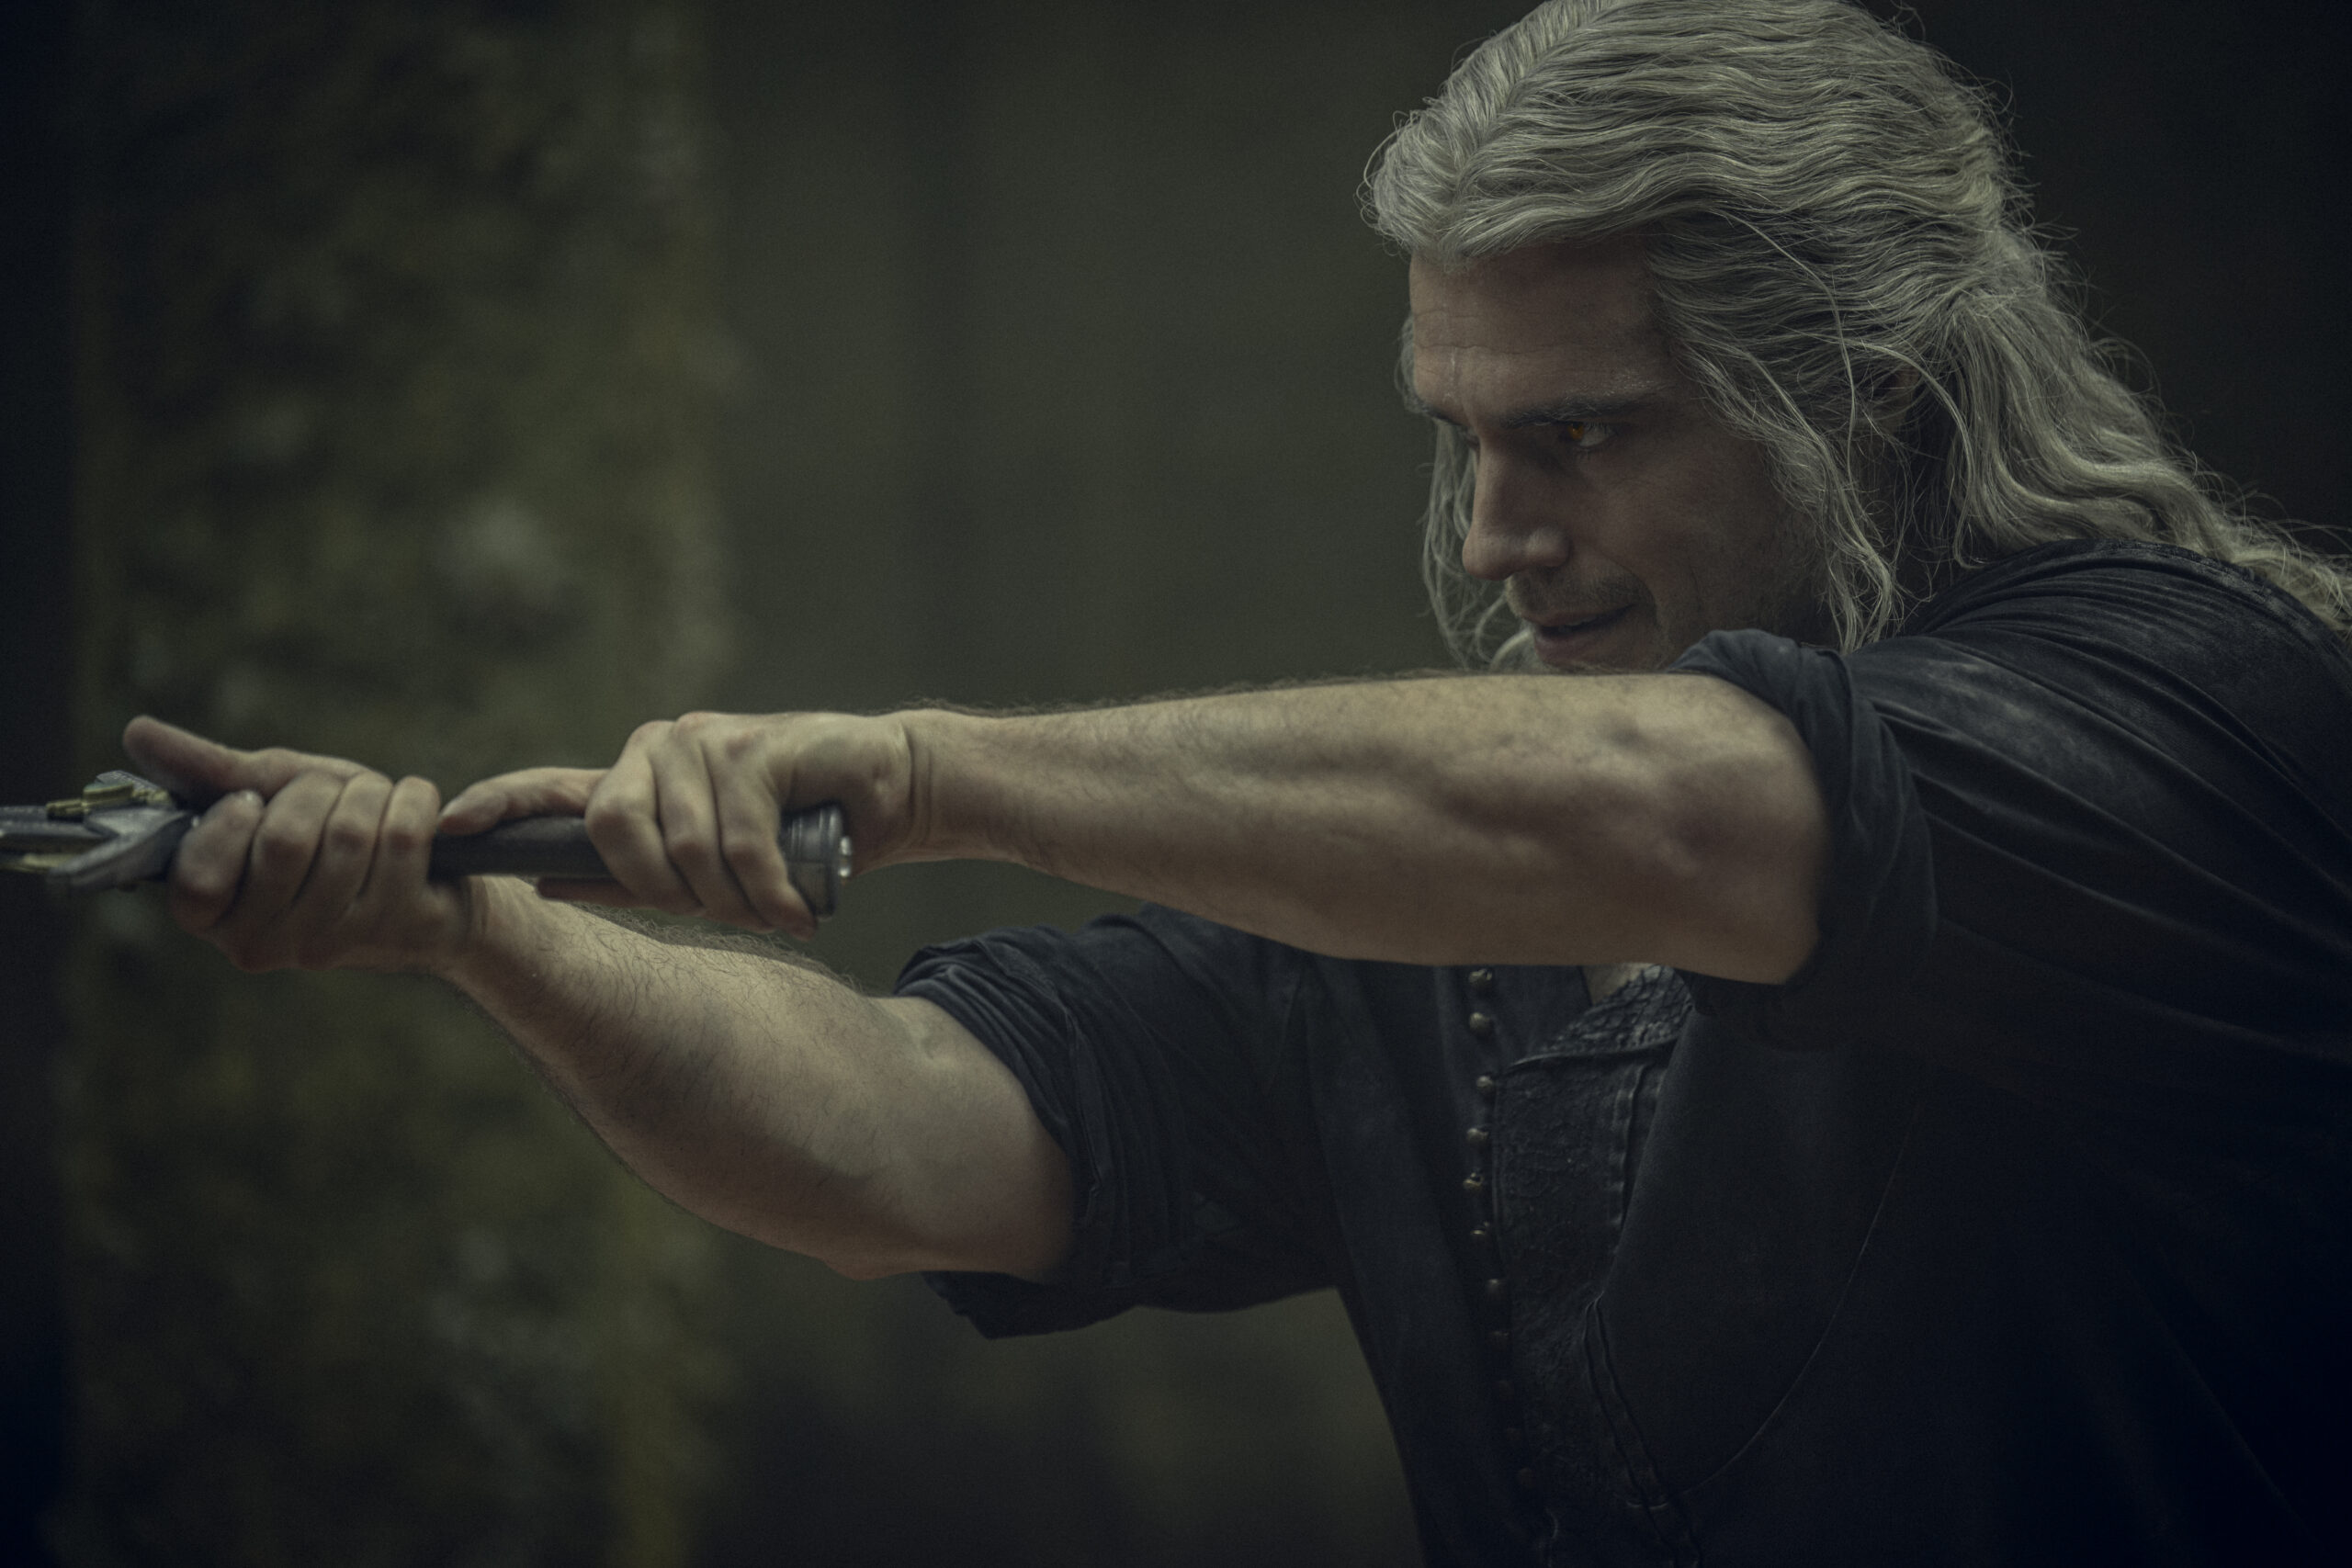 Geralt (Henry Cavill) draws his blade in The Witcher Season 3 Episode 4 "The Invitation" (2023), Netflix